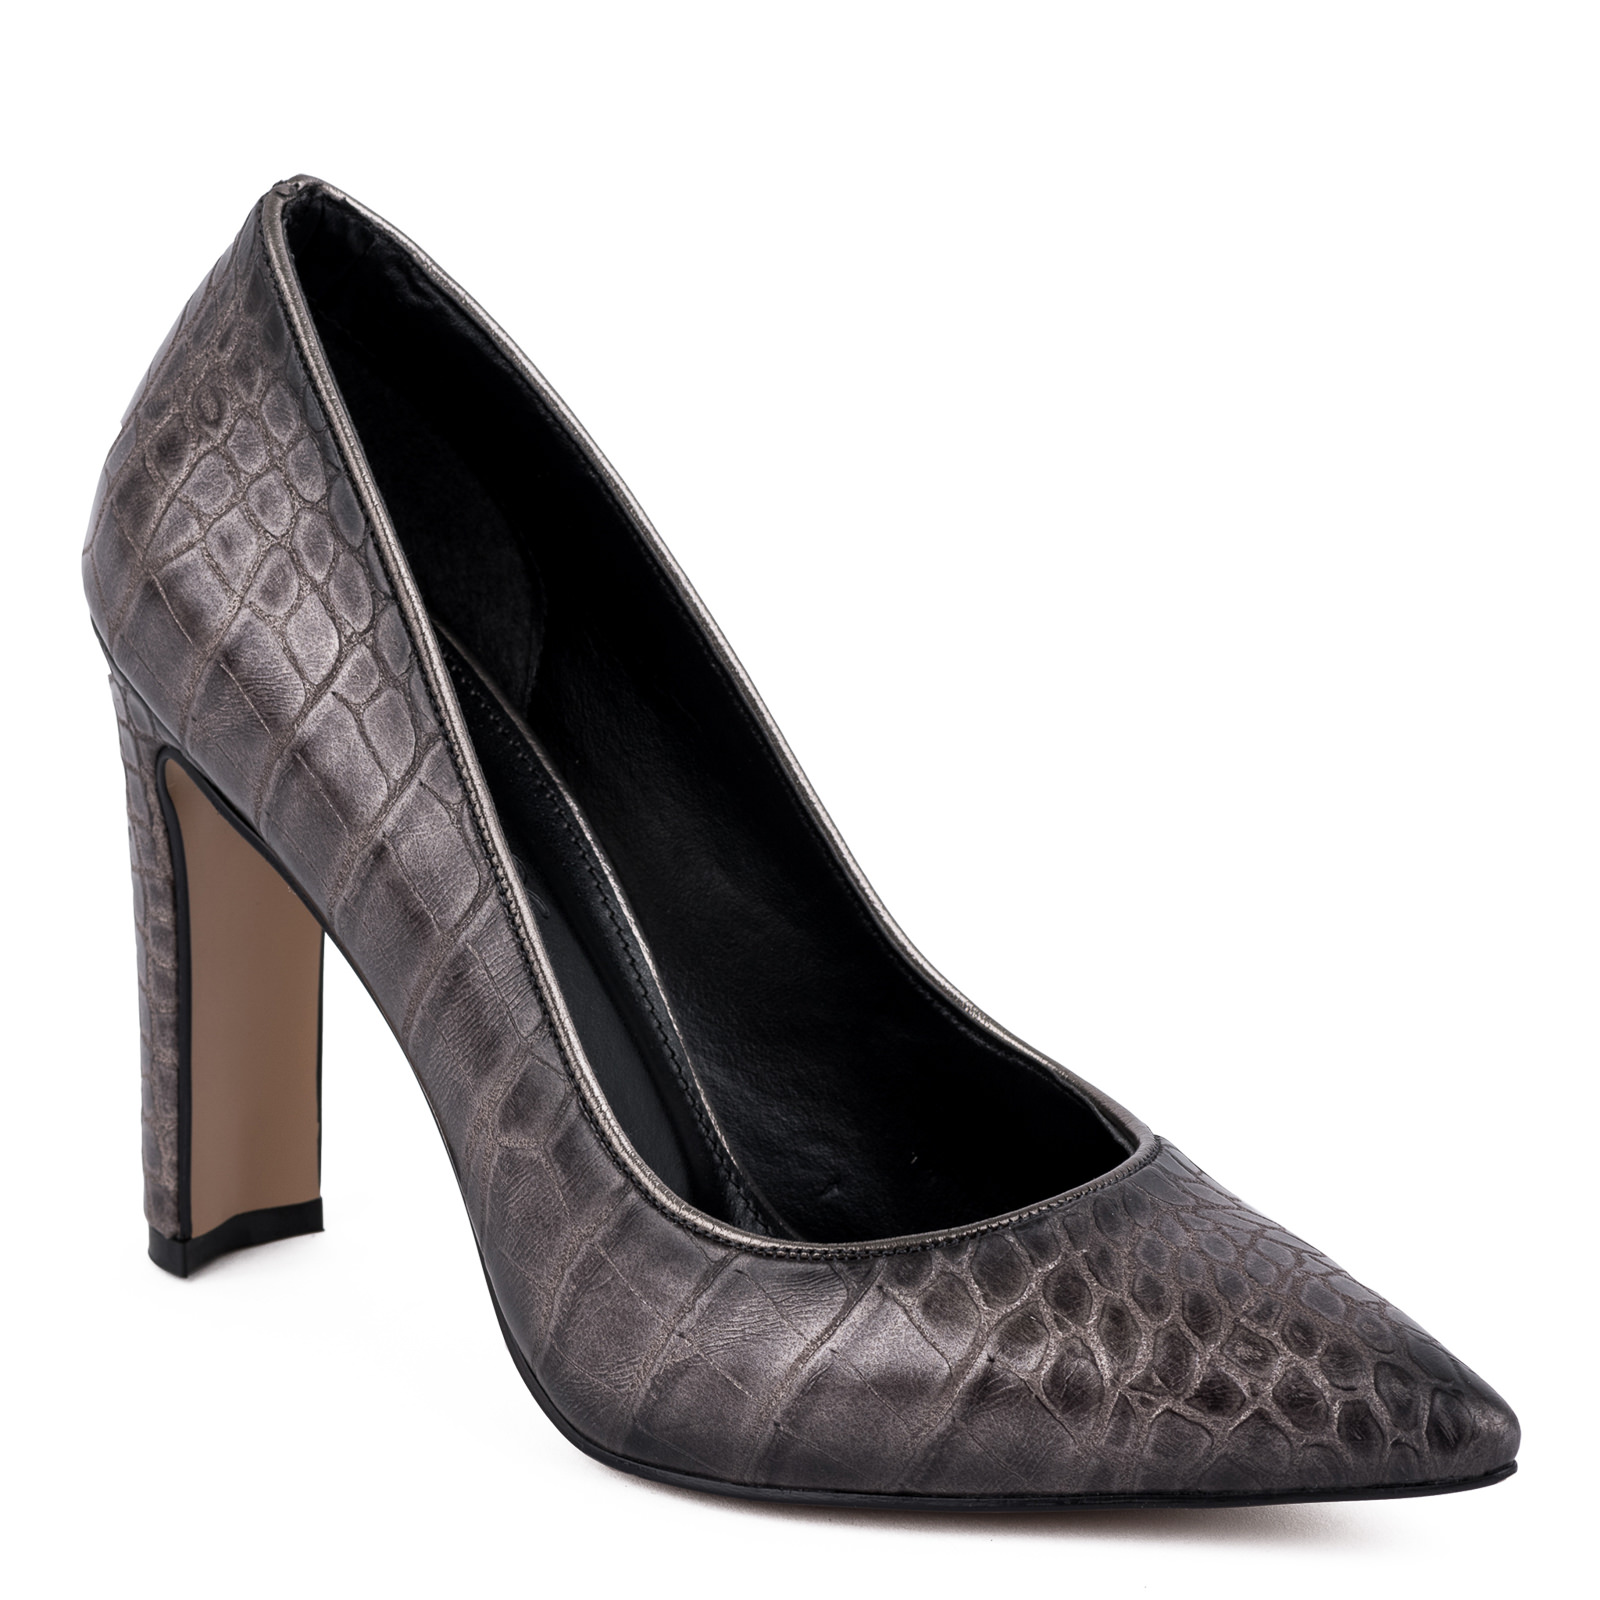 CROC POINTED STILETTO SHOES ON THICK HEEL - PLATINUM